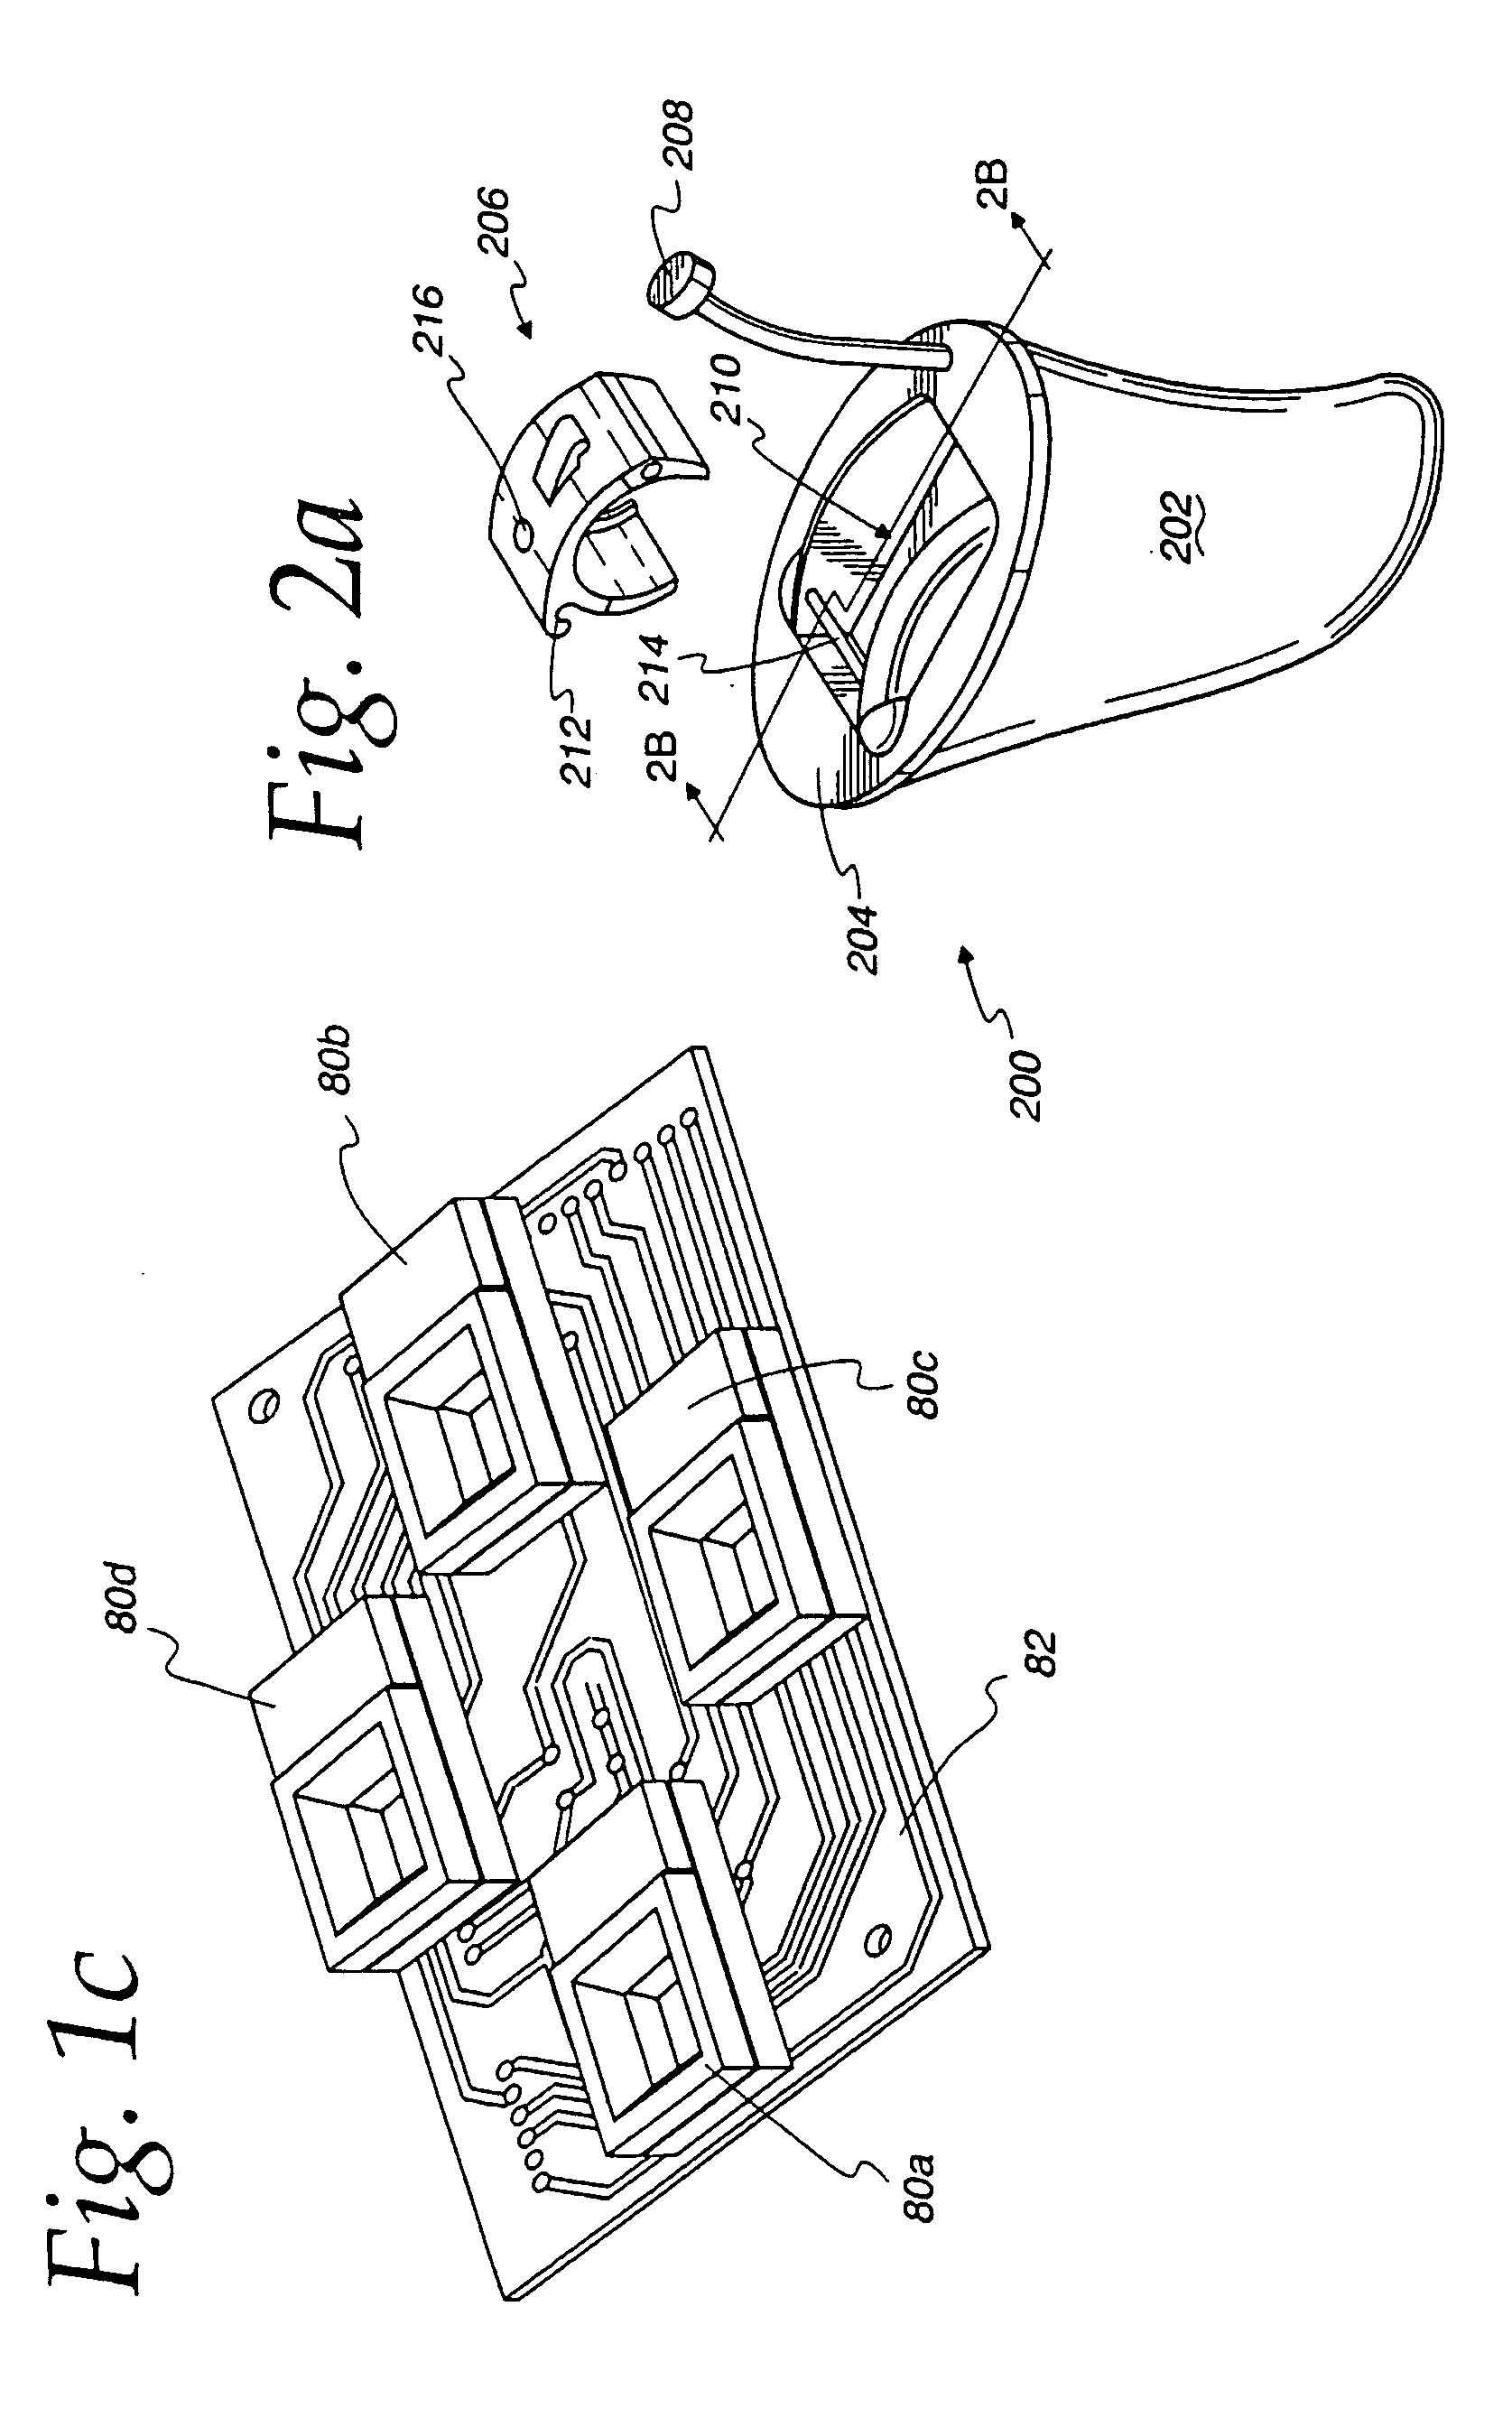 Silicon-based transducer for use in hearing instruments and listening devices